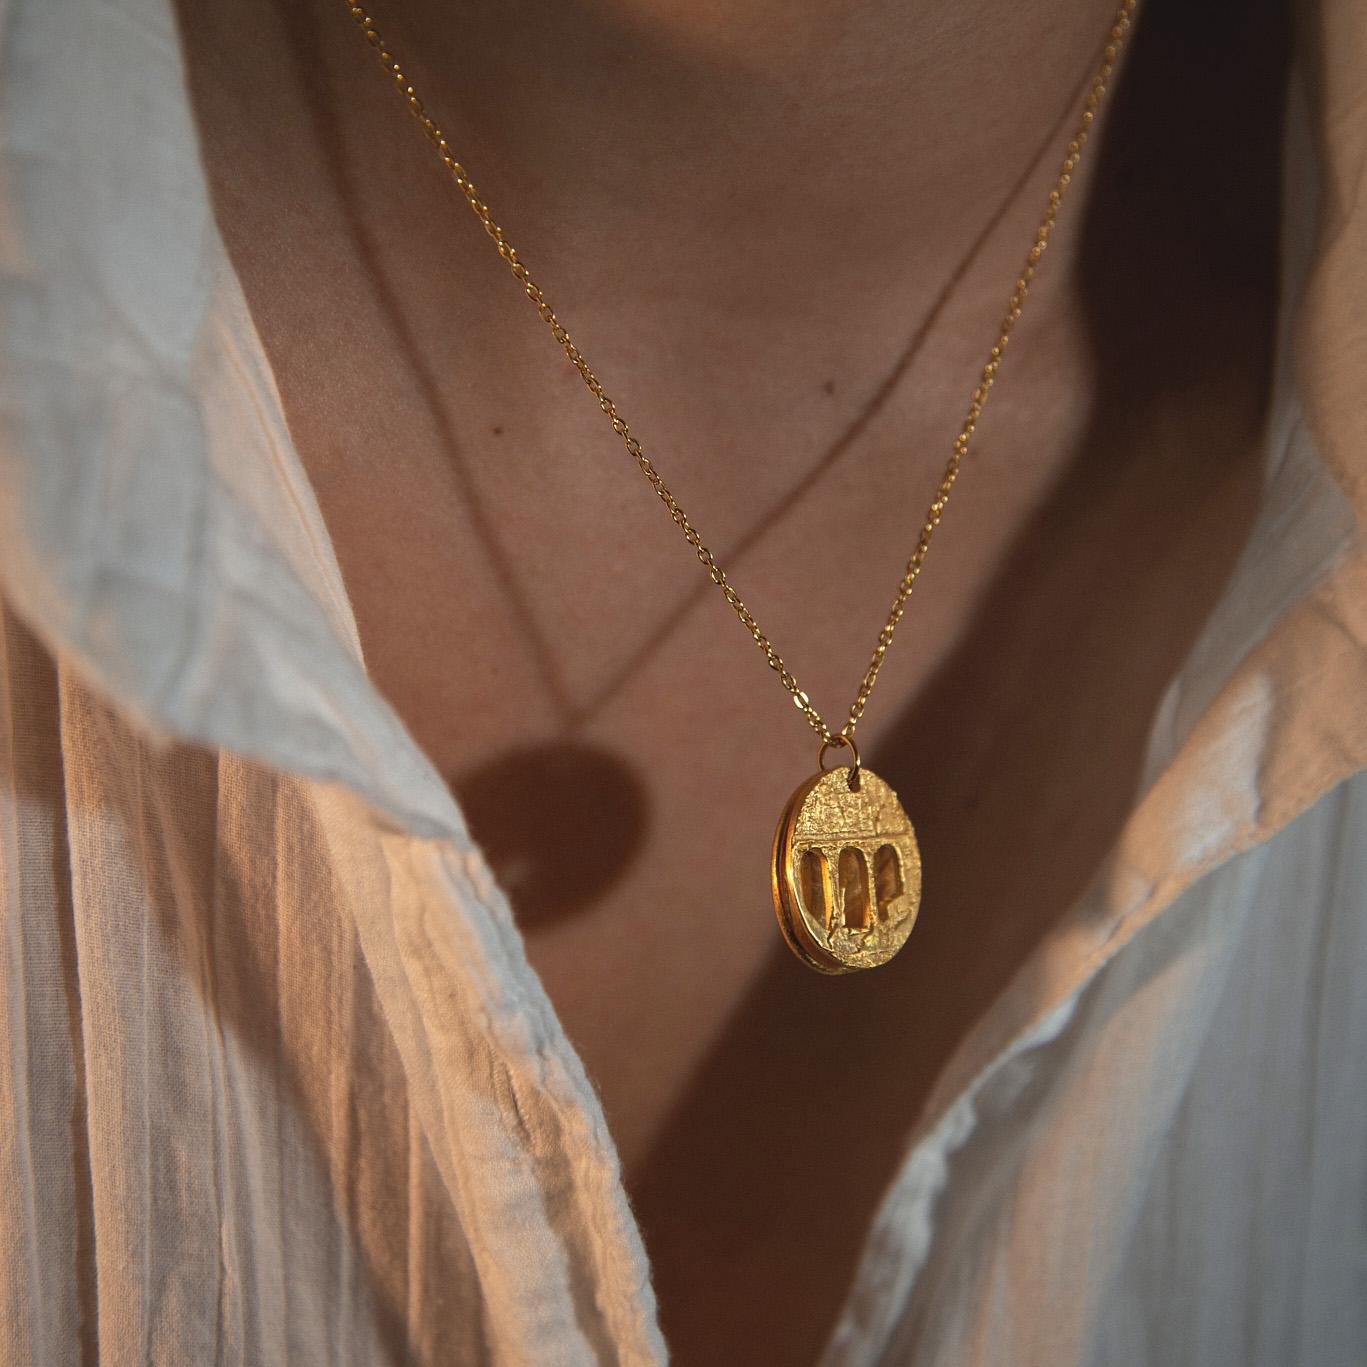 Encapsulating the essence of the earthen era, Dweller's Duality Necklace is crafted with a unique texture that mimics the rough and rugged surfaces of the caves and hoodoos that define the landscapes of Cappadocia.

Dweller's Duality Necklace is